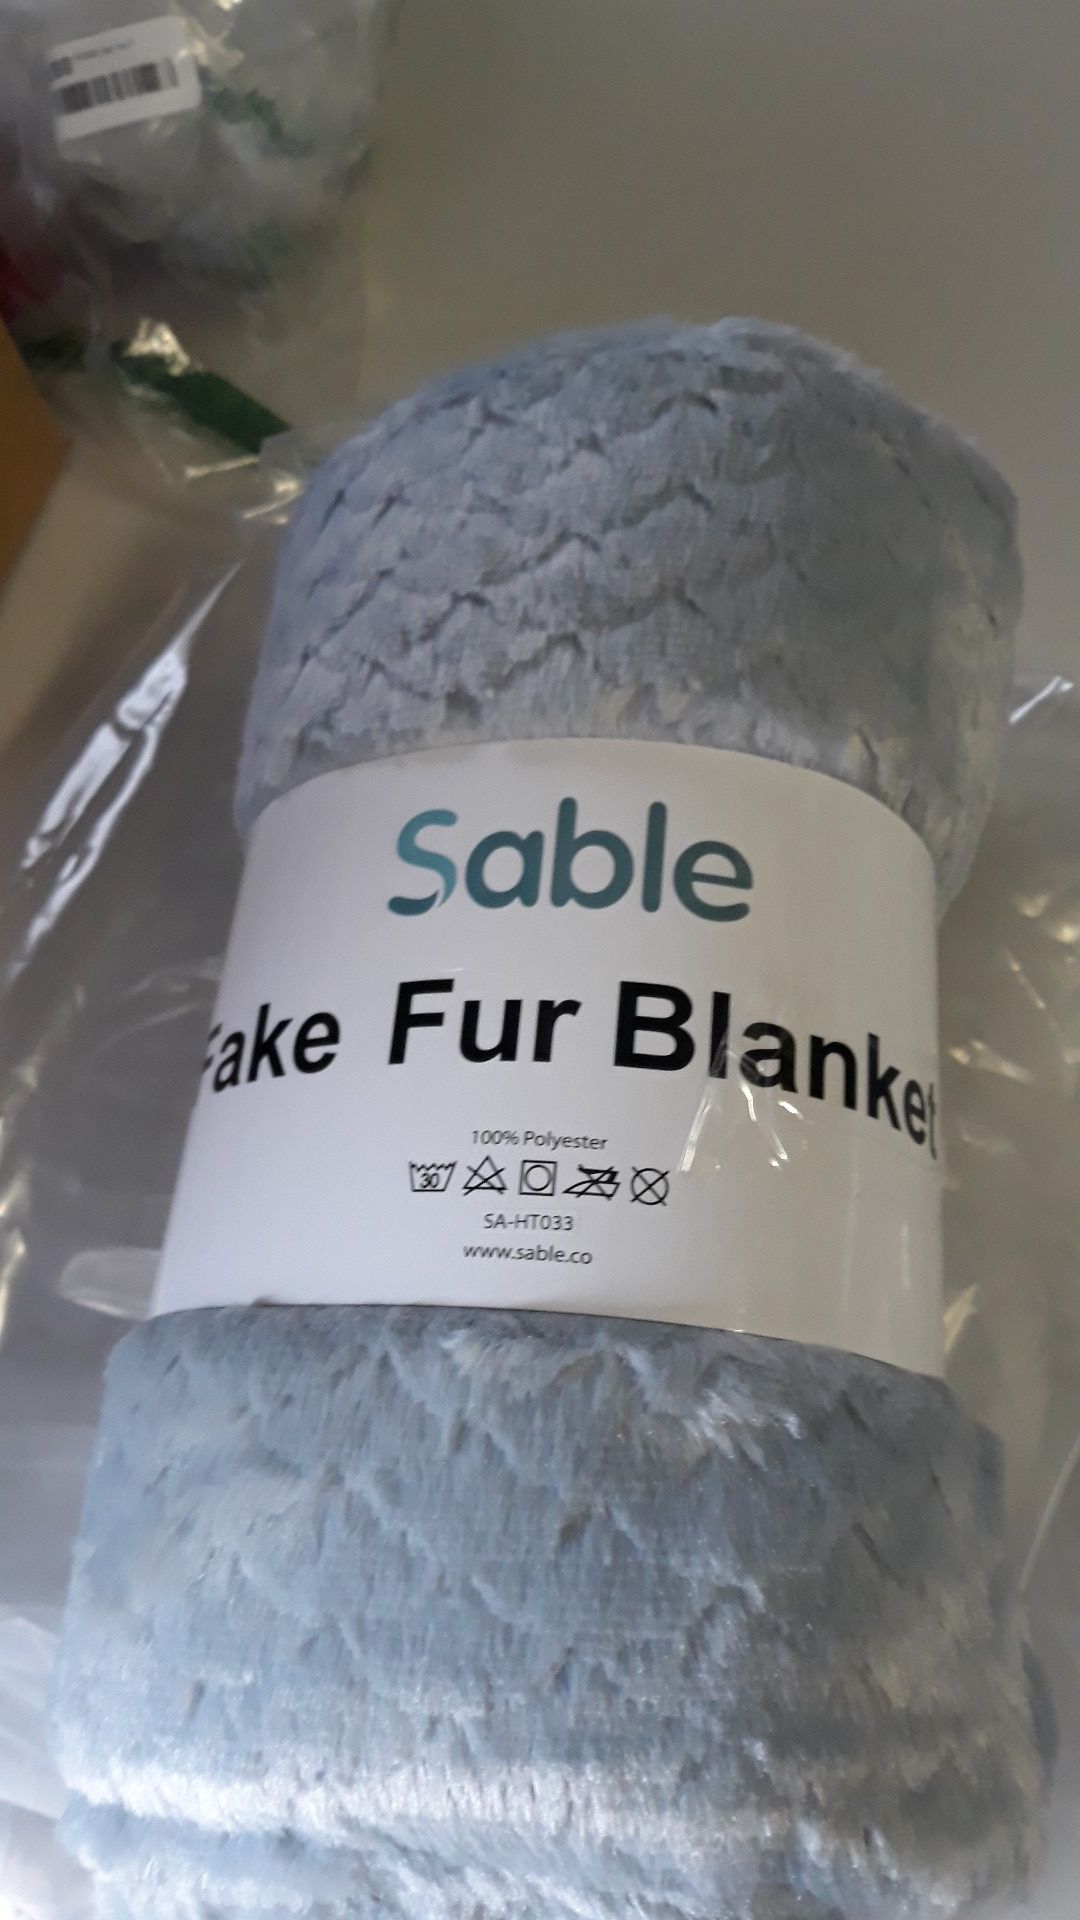 Sable Blanket 60" X 80" Twin size light gray/blue